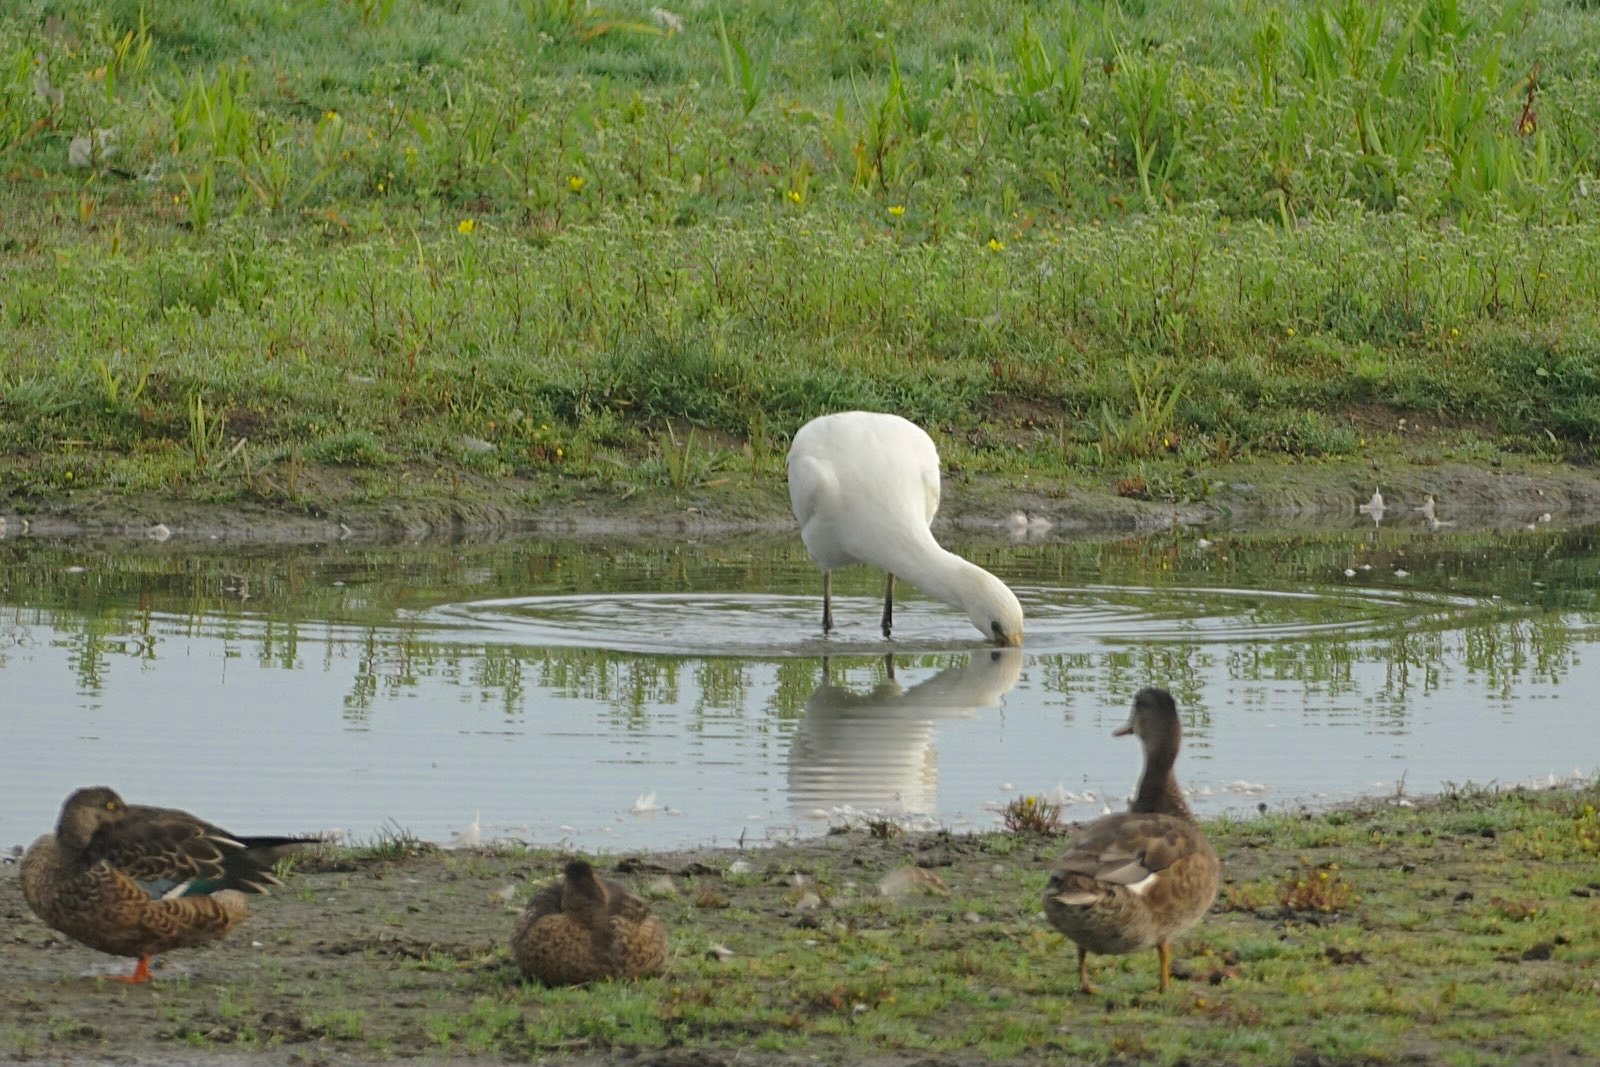 A spoonbill hunting while some ducks look on.